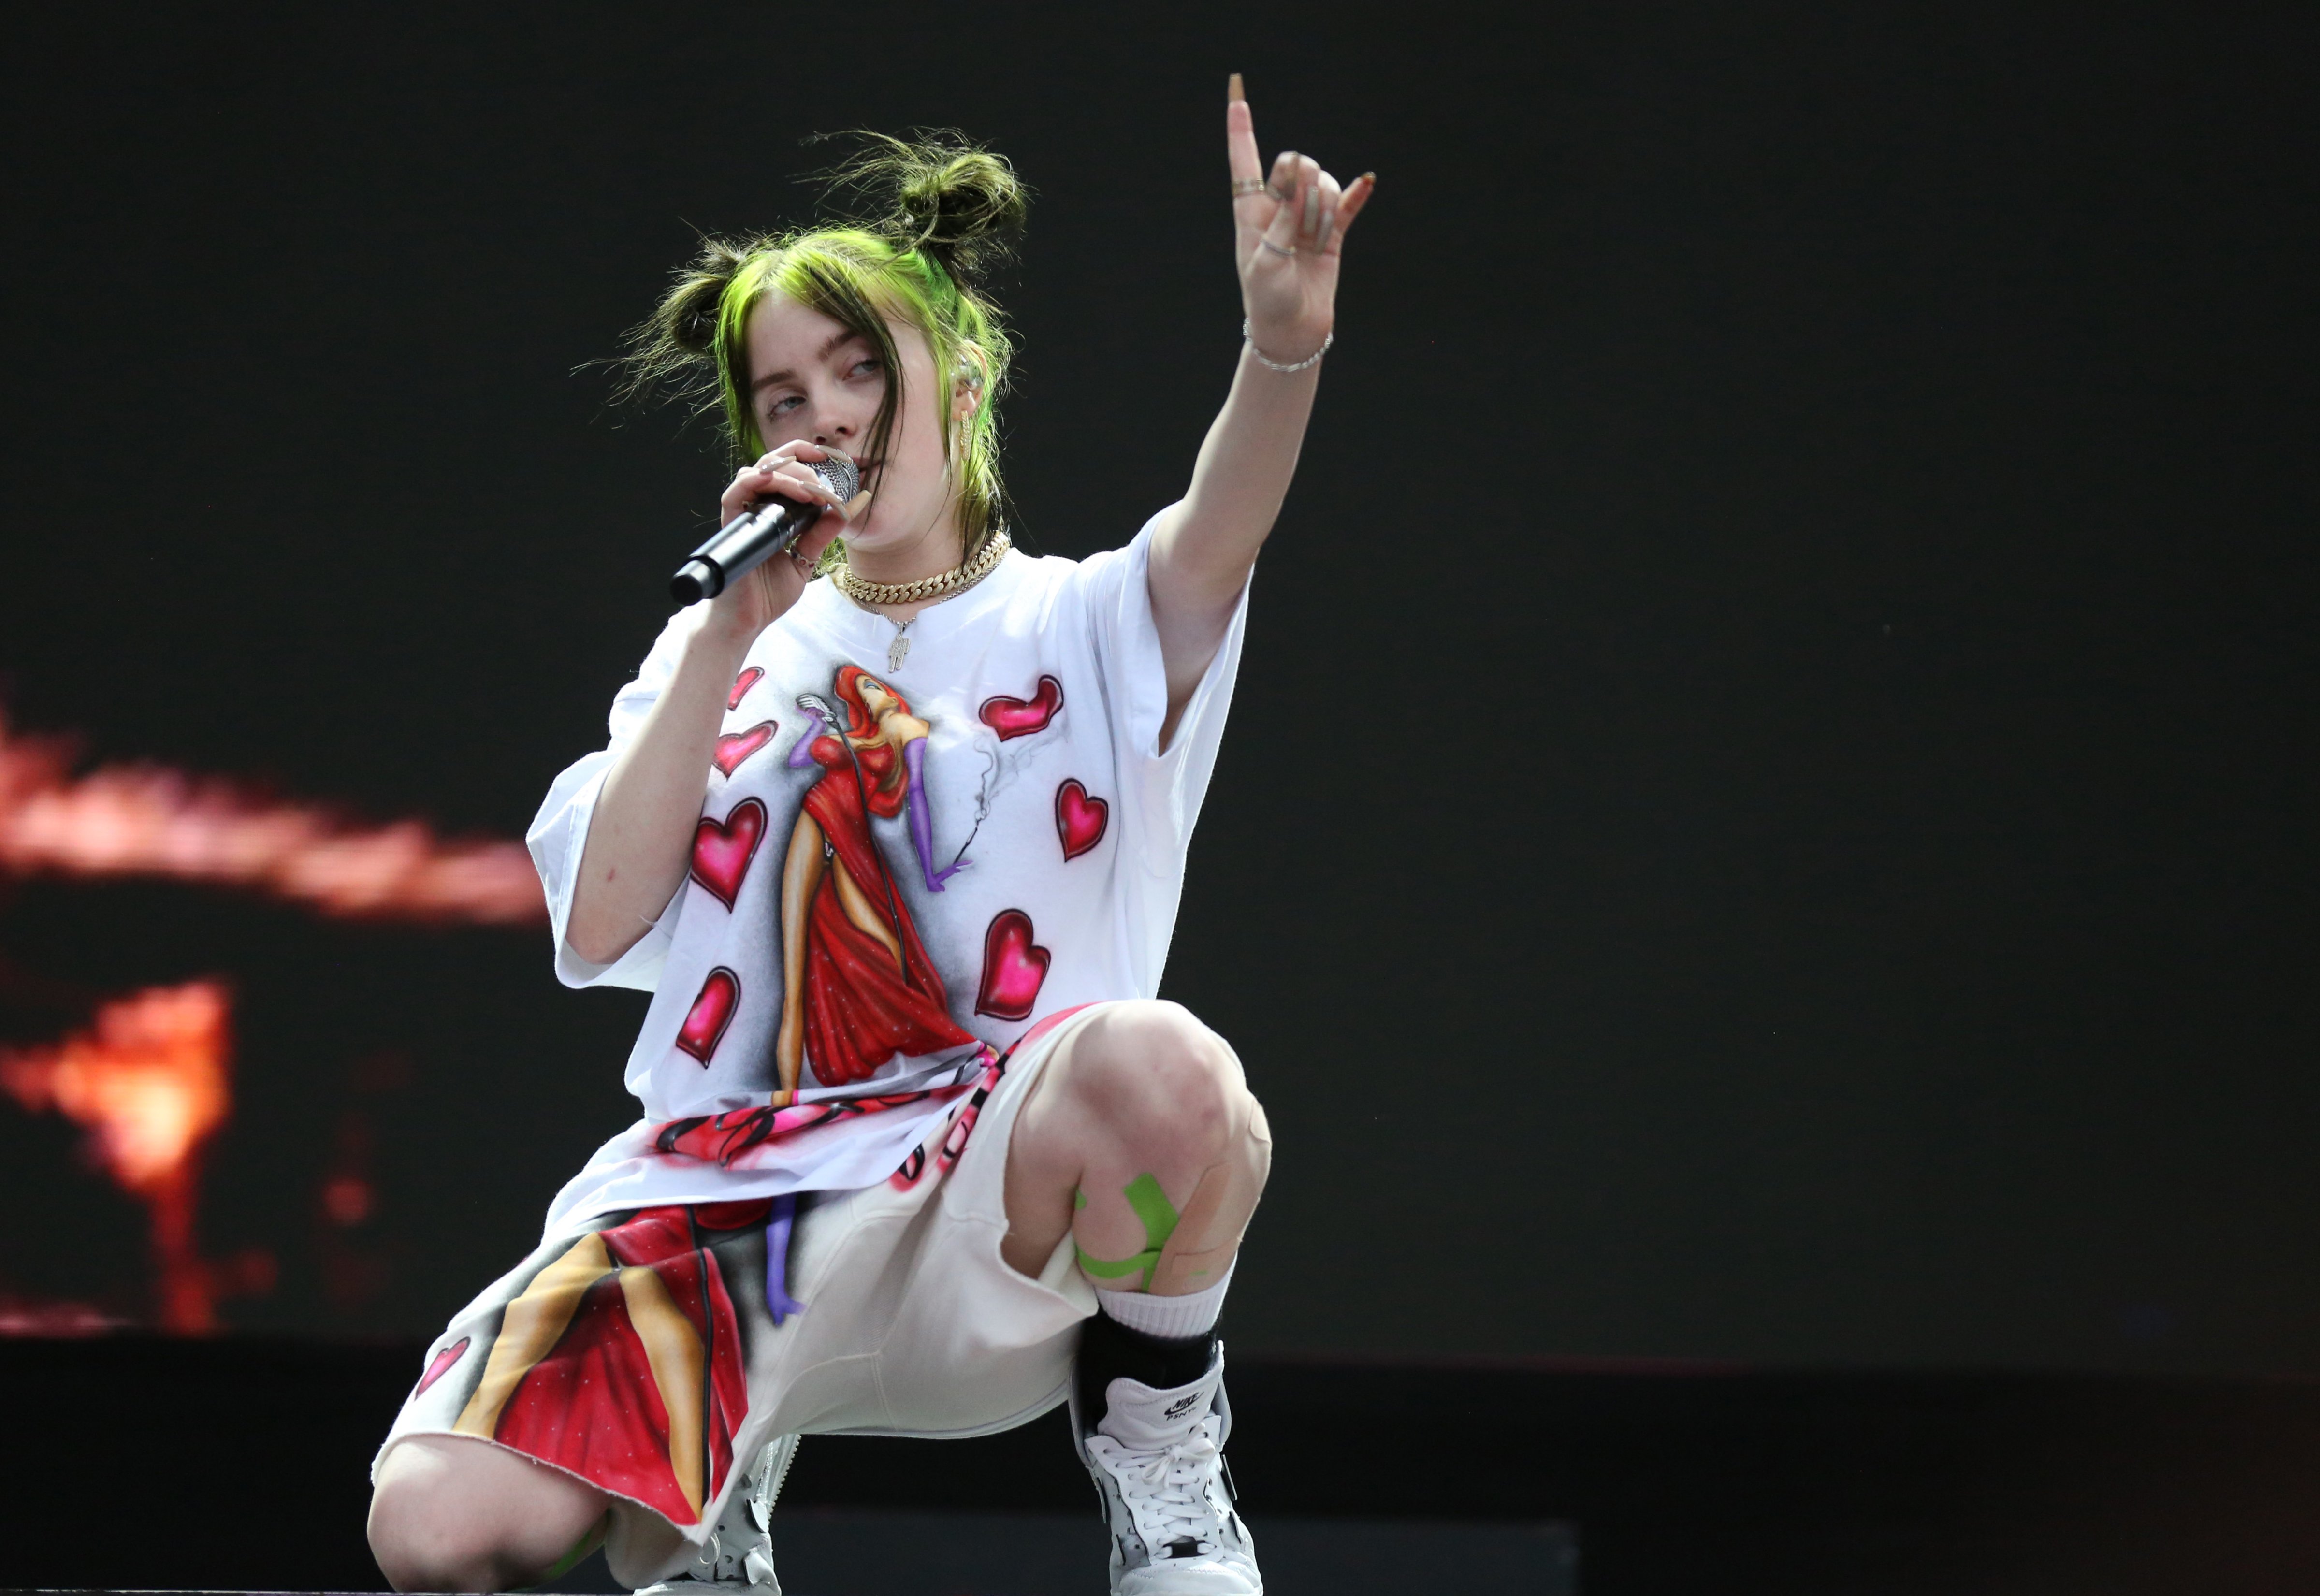 Billie Eilish at the 2019 Electric Picnic Music Festival in Ireland. (Debbie Hickey—Getty Images)